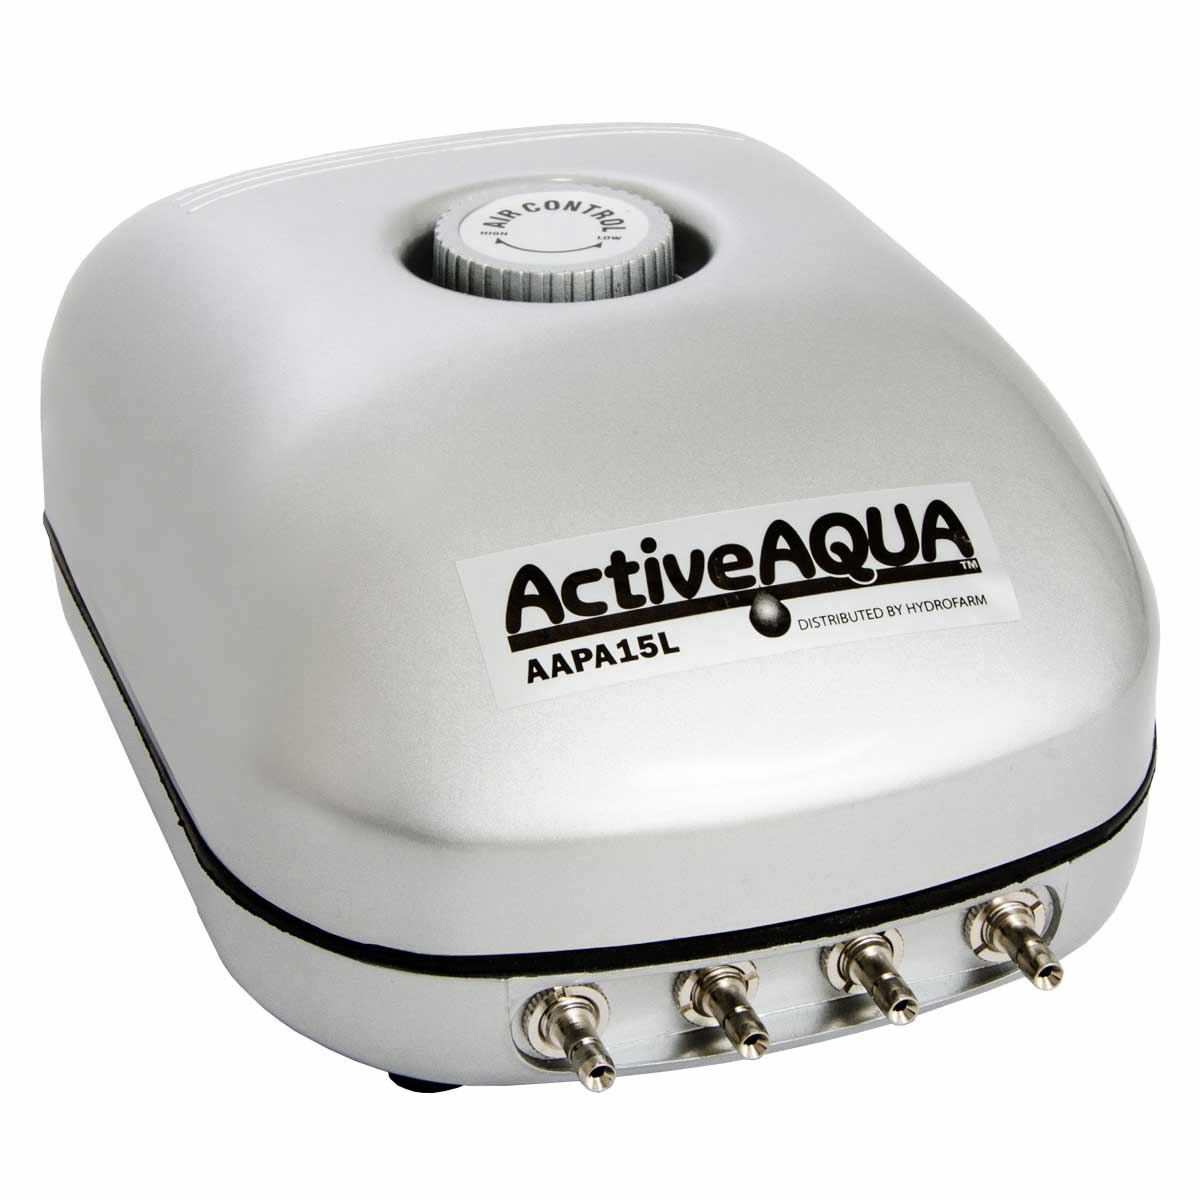 The TAS Active Aqua Air Pump with 4 Outlets, 15L Per Minute is a super silent air pump designed specifically for hydroponics equipment. It ensures efficient oxygenation of reservoirs, providing fresh and clean air for your.